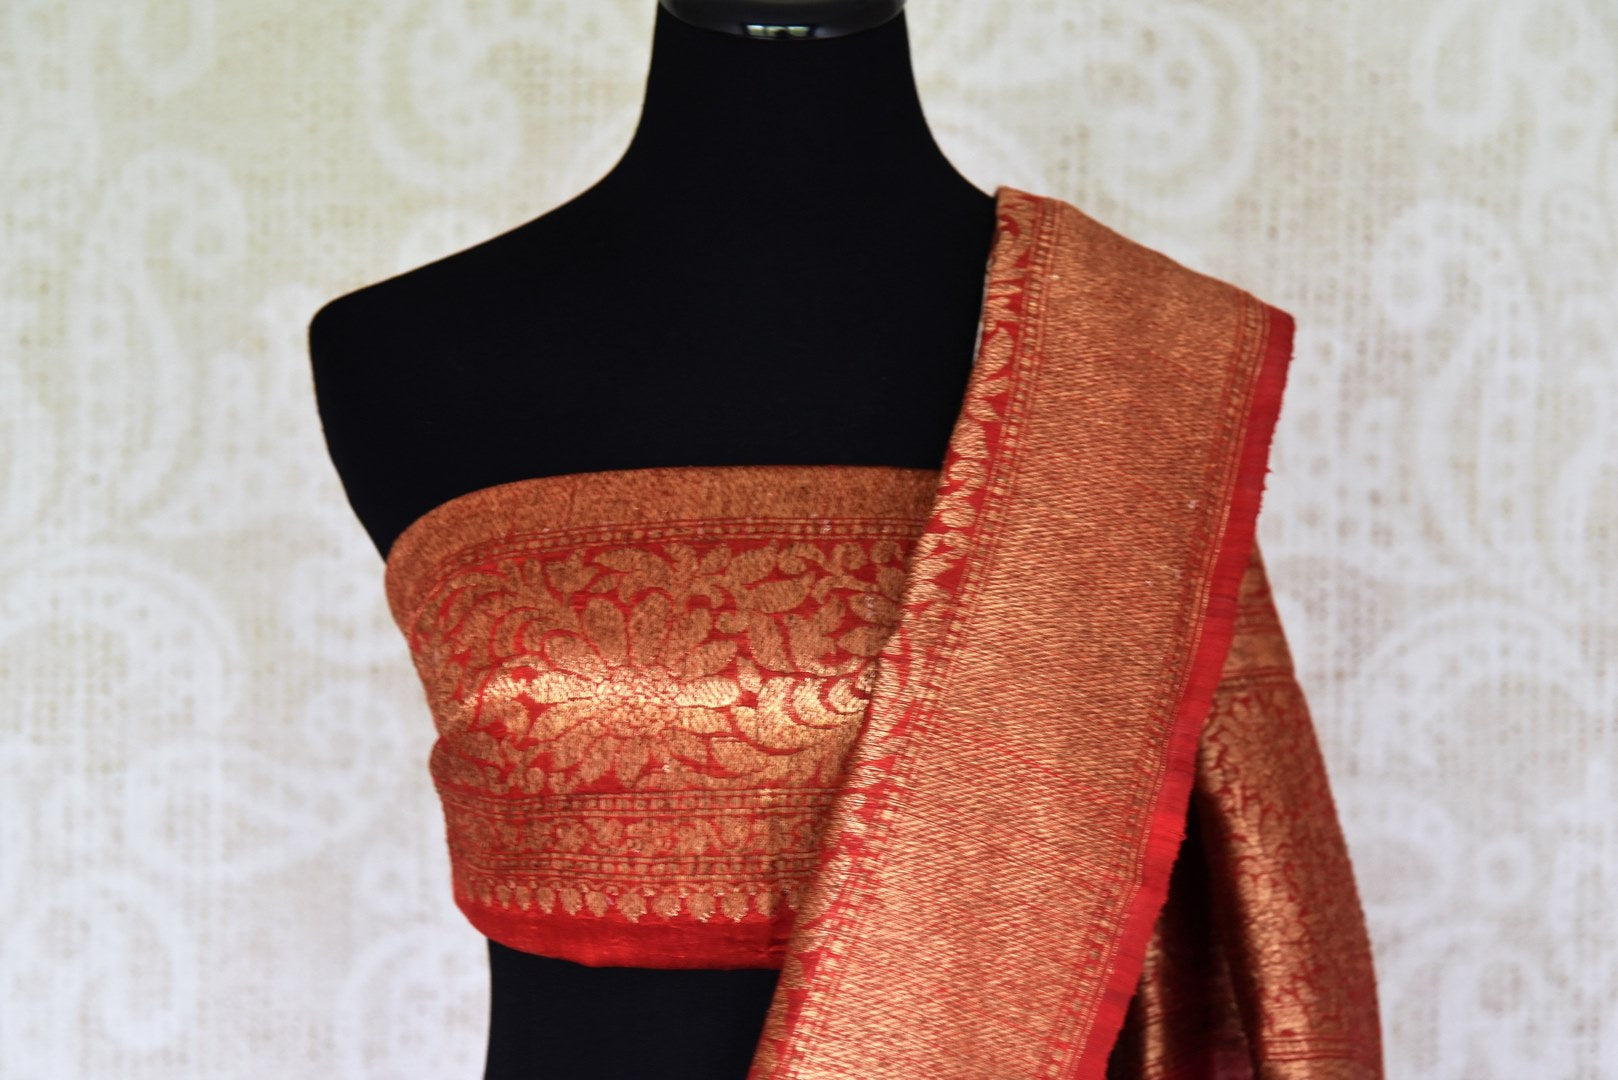 Fall in love with all things classic like this cream matka banarsi silk saree. The sensational combination of cream and red makes it even alluring. The red zari border and contrasting red blouse enhance the beauty. Shop designer silk saree, ikkat sari, georgette saree online or visit Pure Elegance store, USA.-blouse pallu